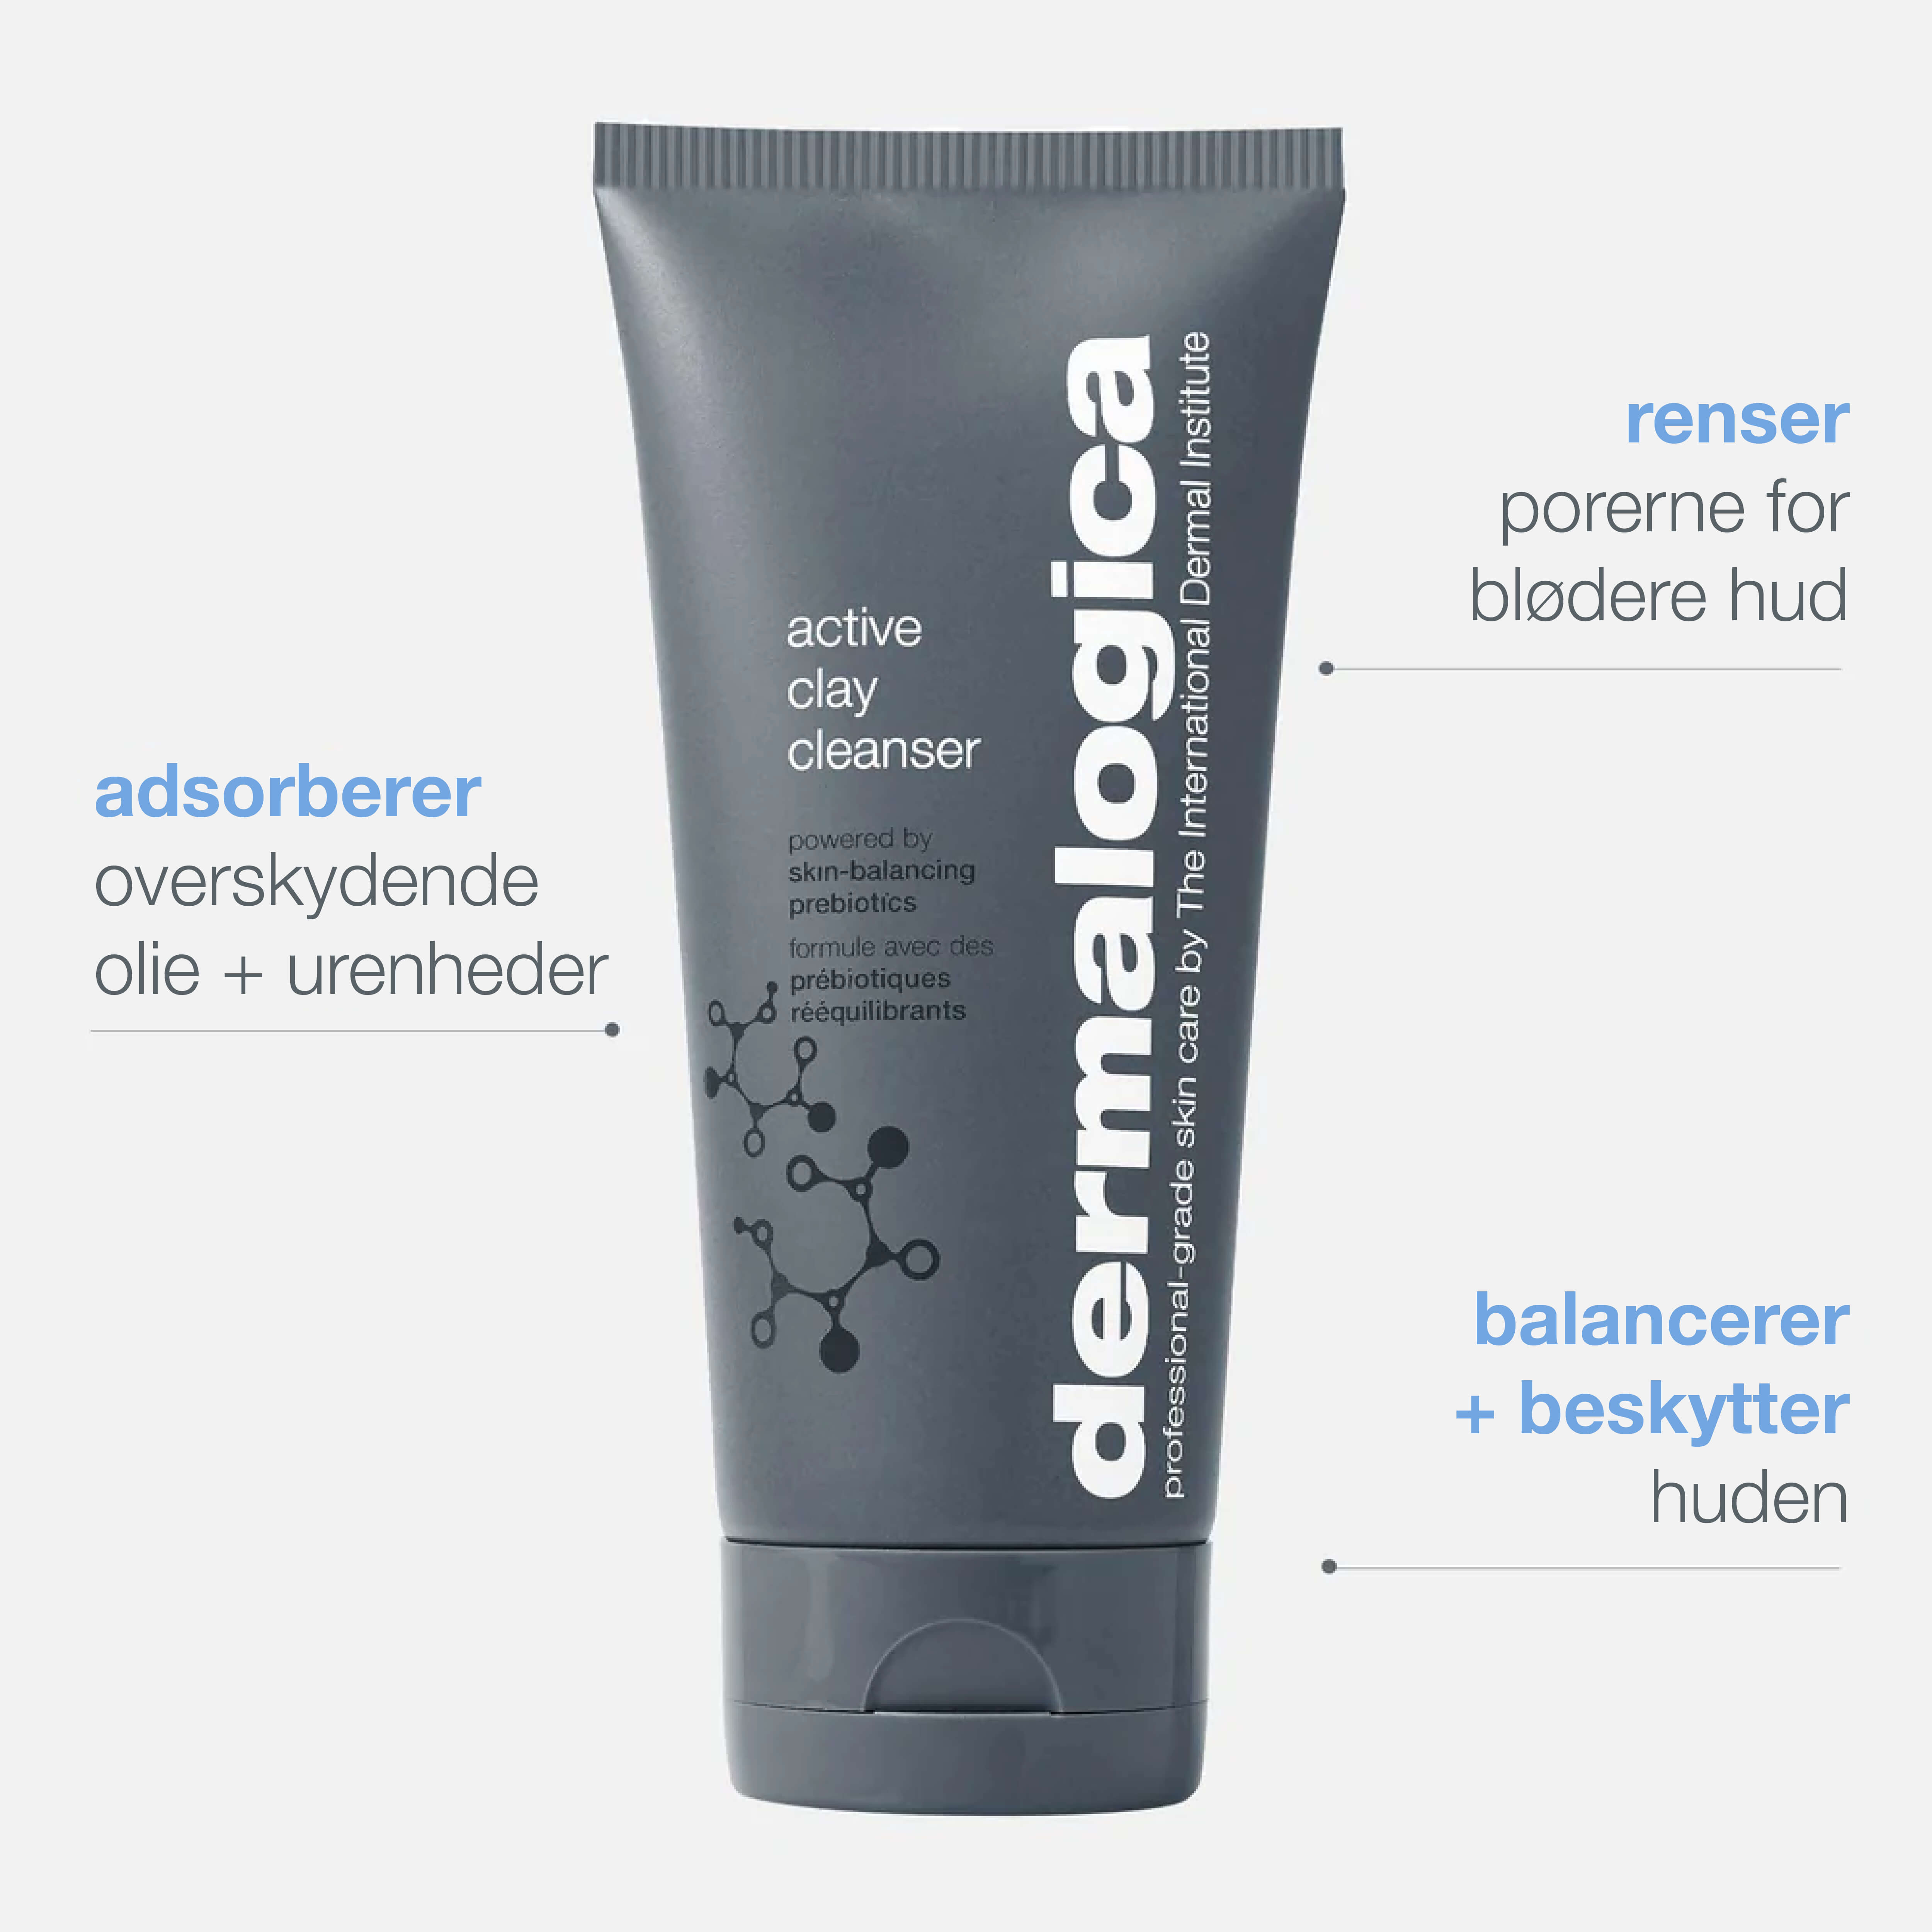 active clay cleanser (150 ml)